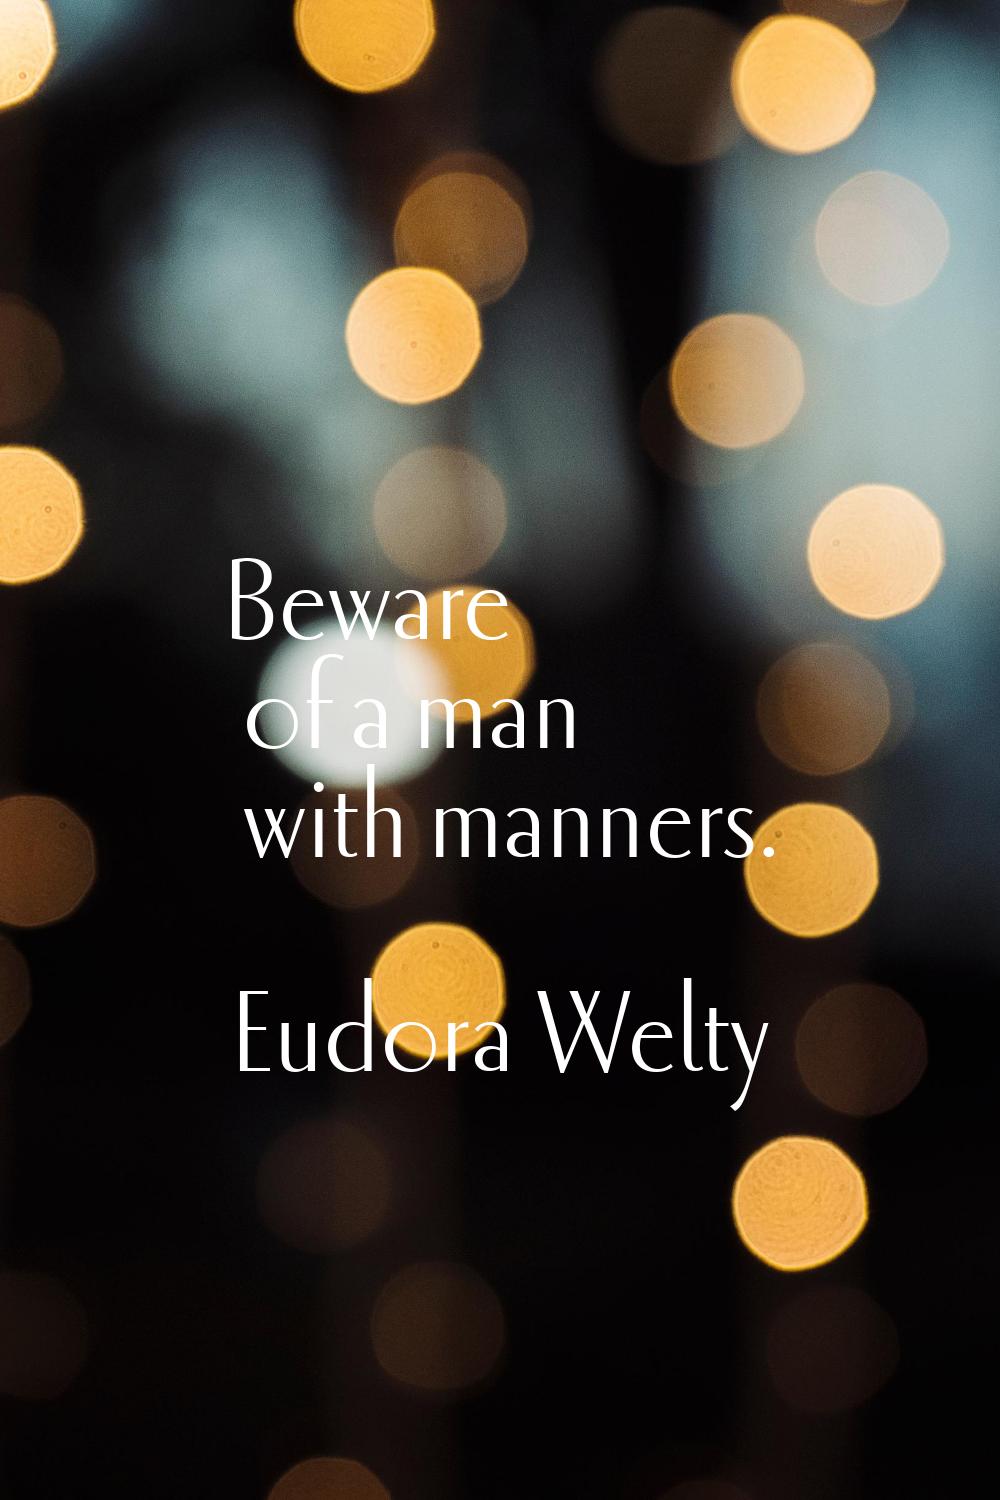 Beware of a man with manners.